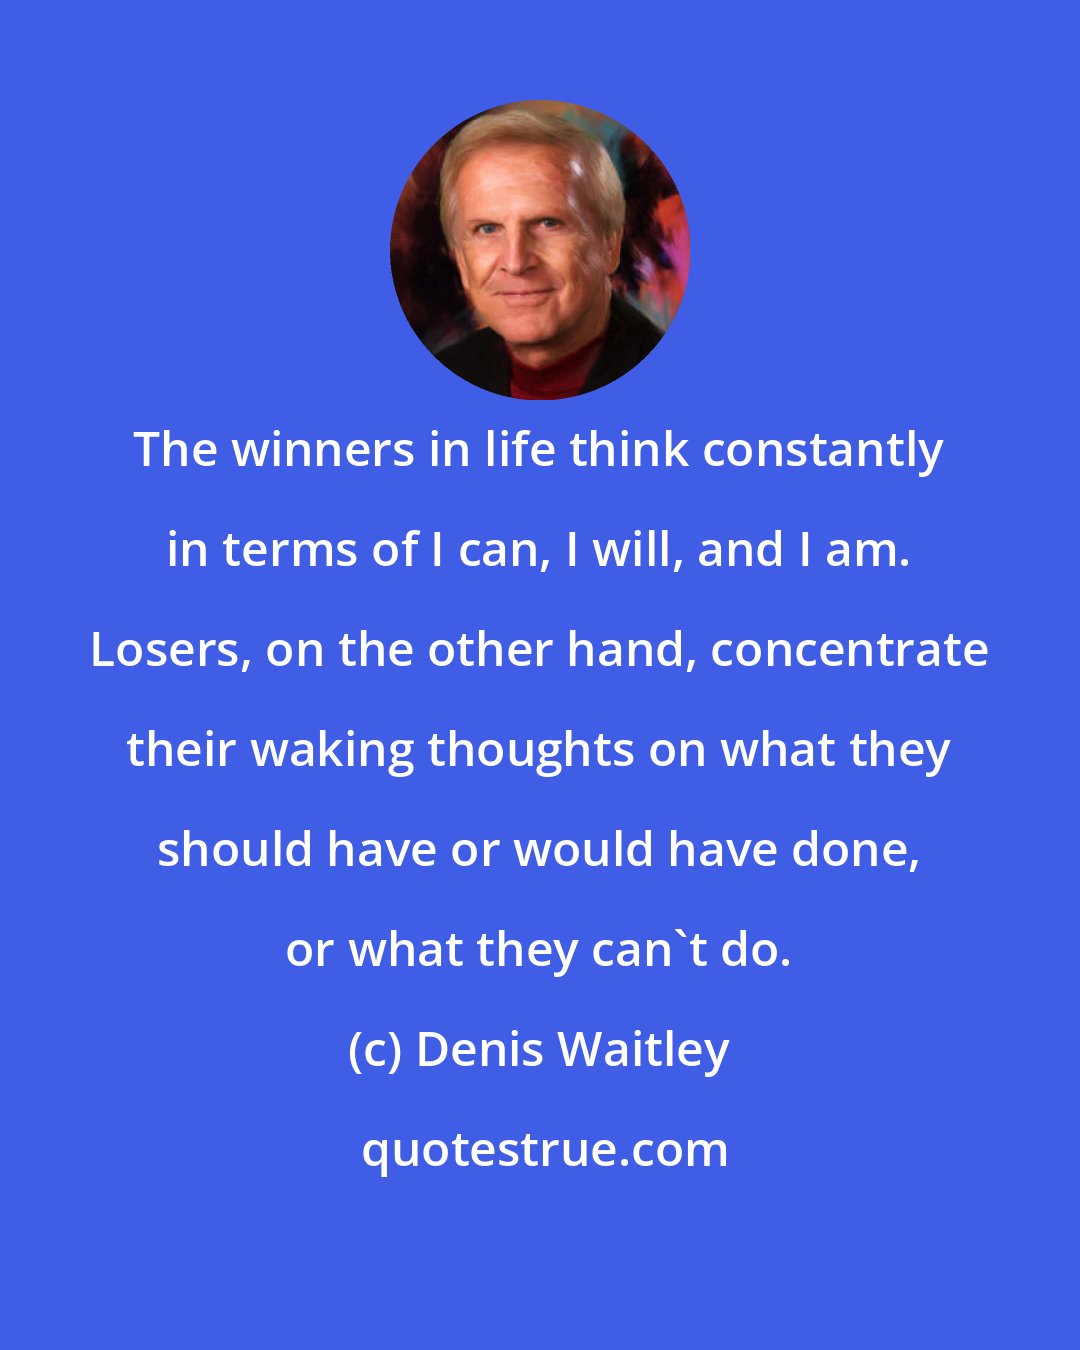 Denis Waitley: The winners in life think constantly in terms of I can, I will, and I am. Losers, on the other hand, concentrate their waking thoughts on what they should have or would have done, or what they can't do.